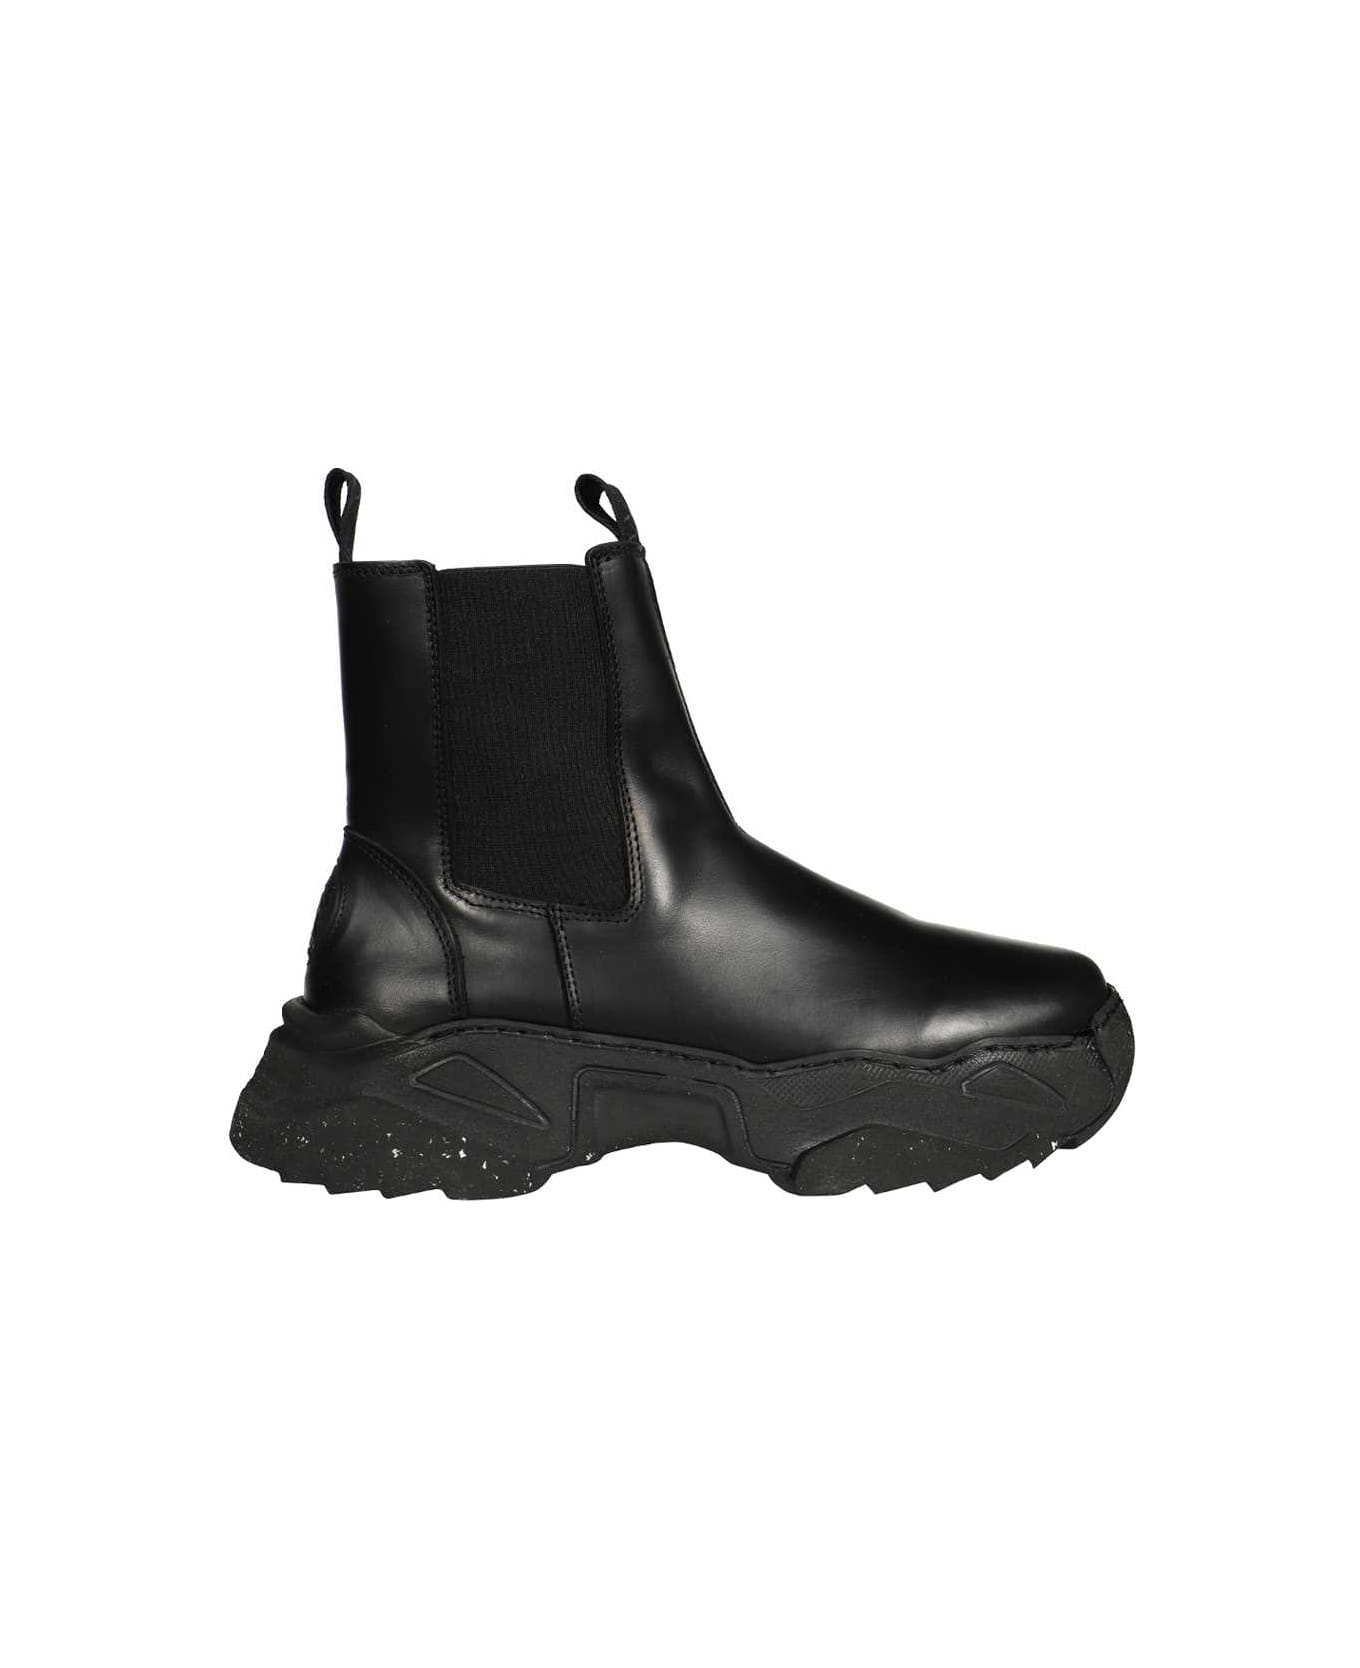 Vivienne Westwood Leather Chelsea Boots - black ブーツ